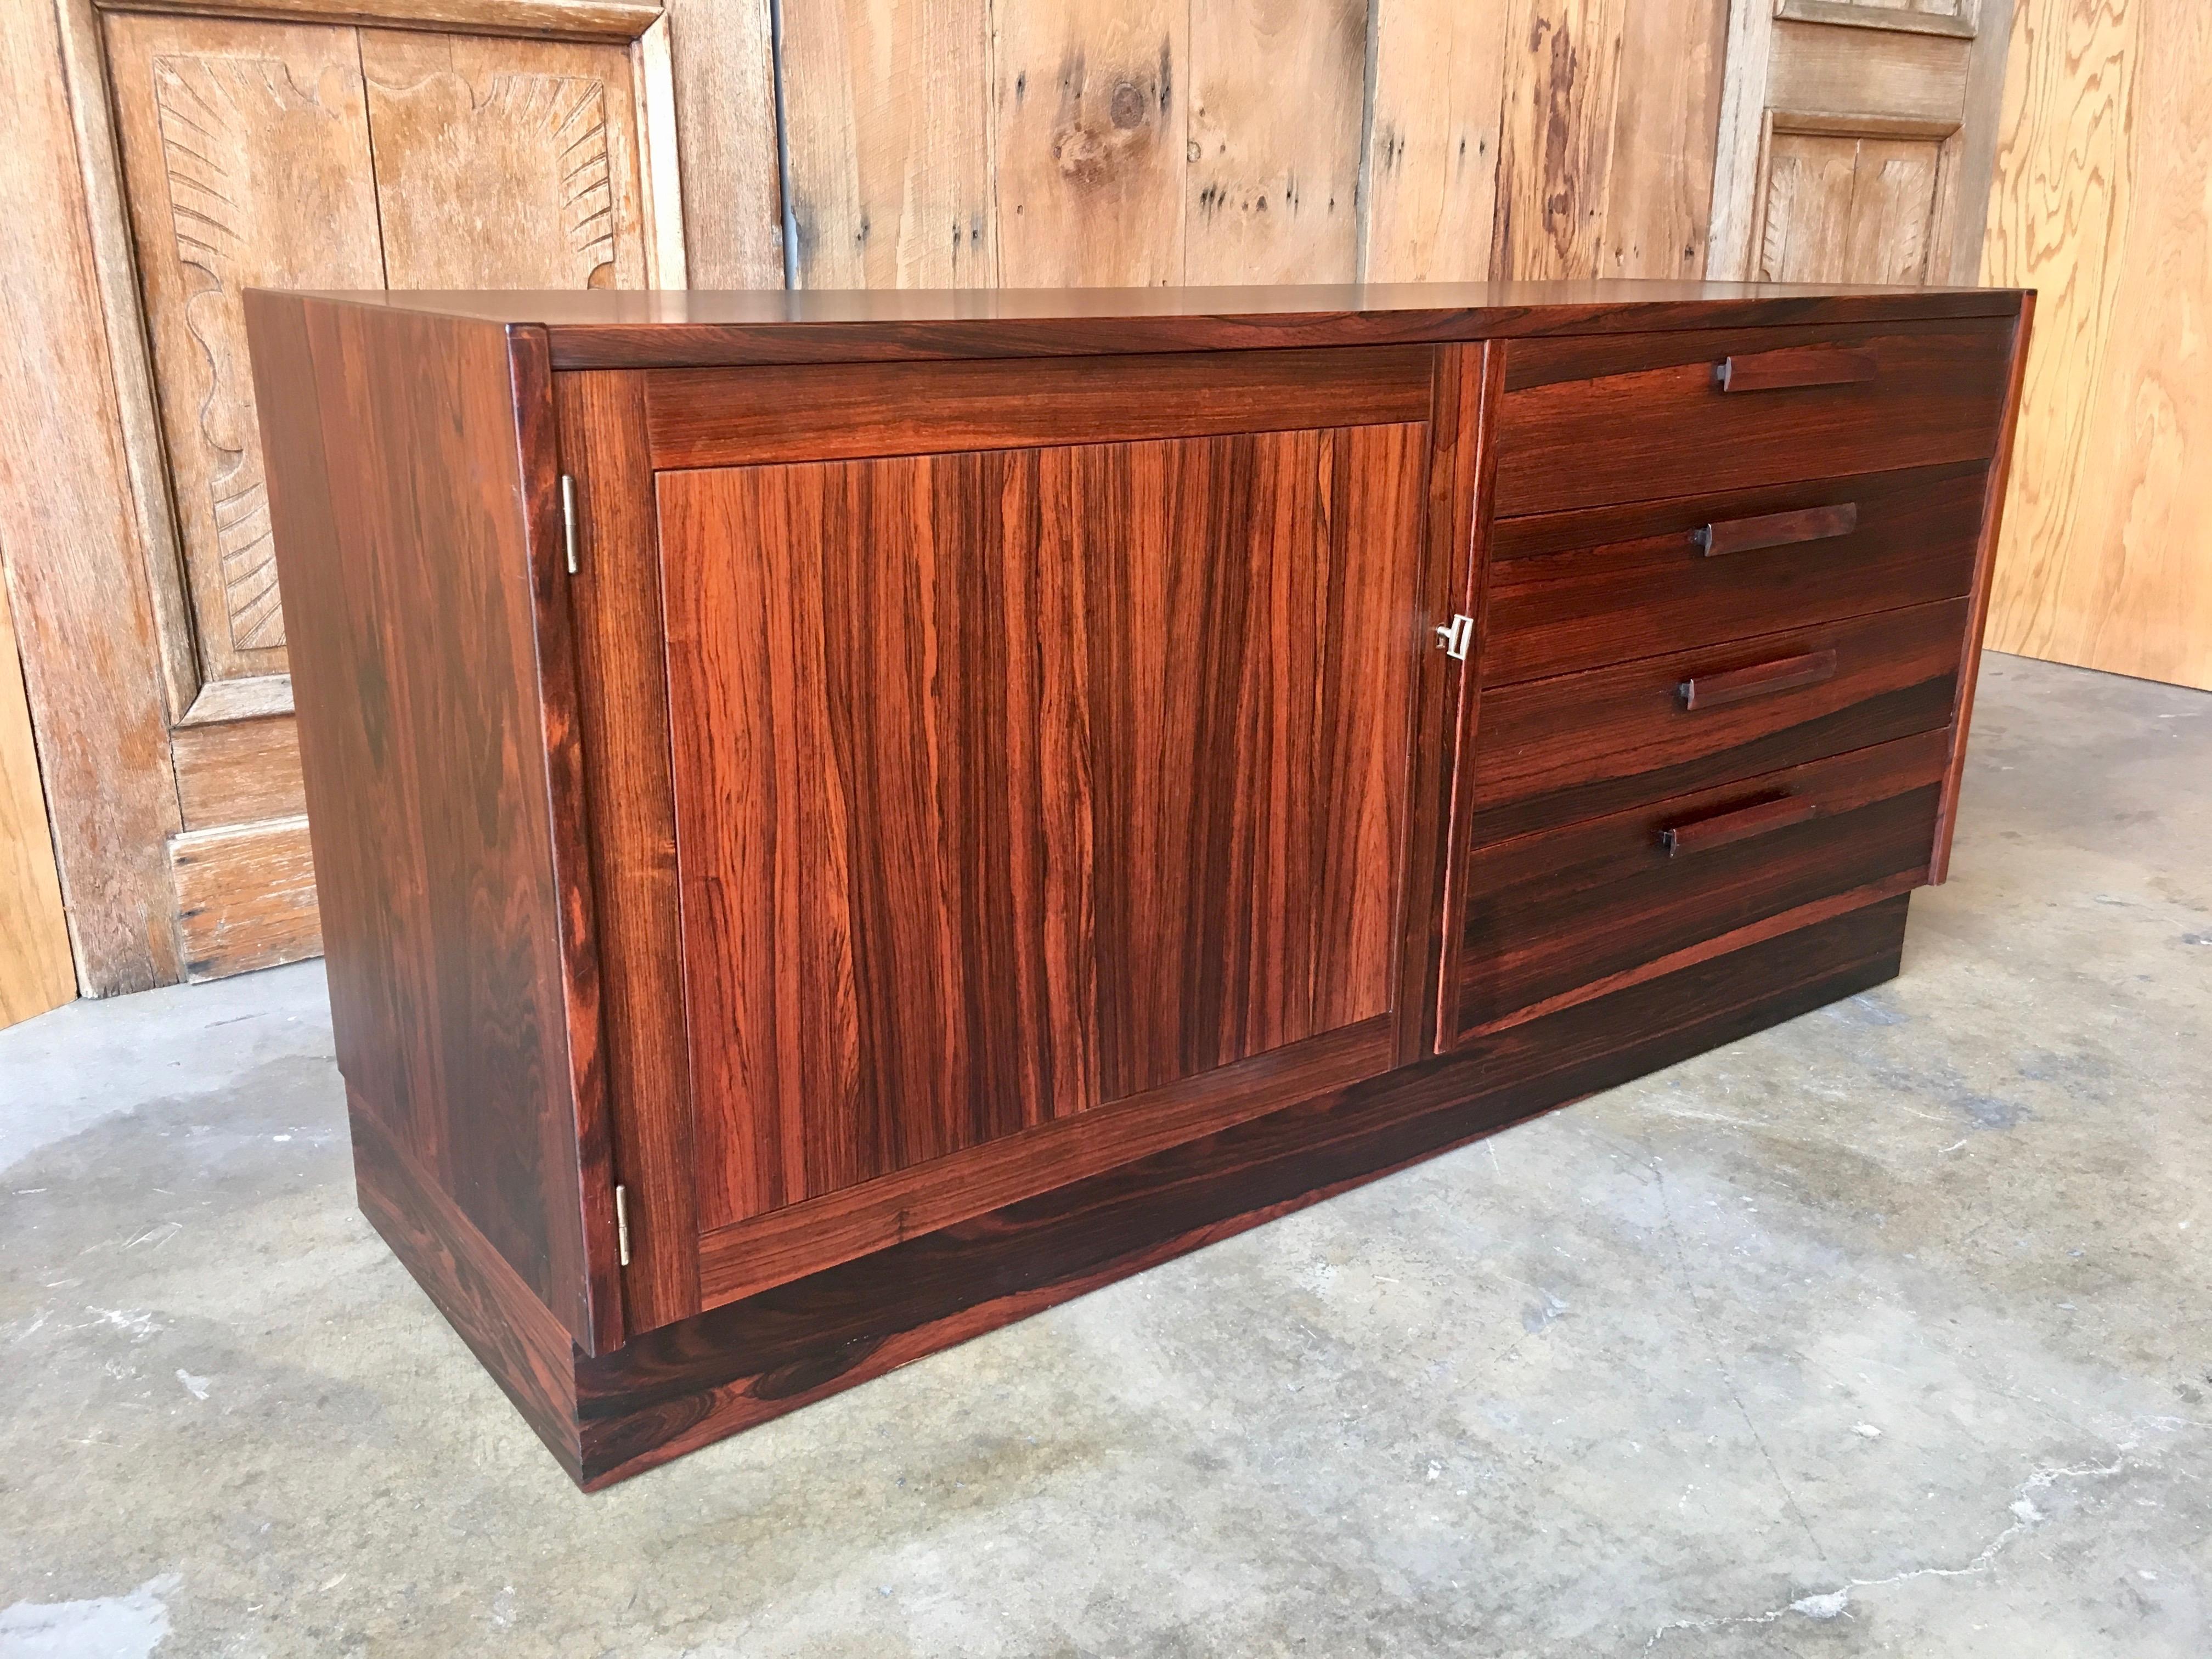 Petite low rosewood credenza made by Troeds Bjarnum of Sweden.